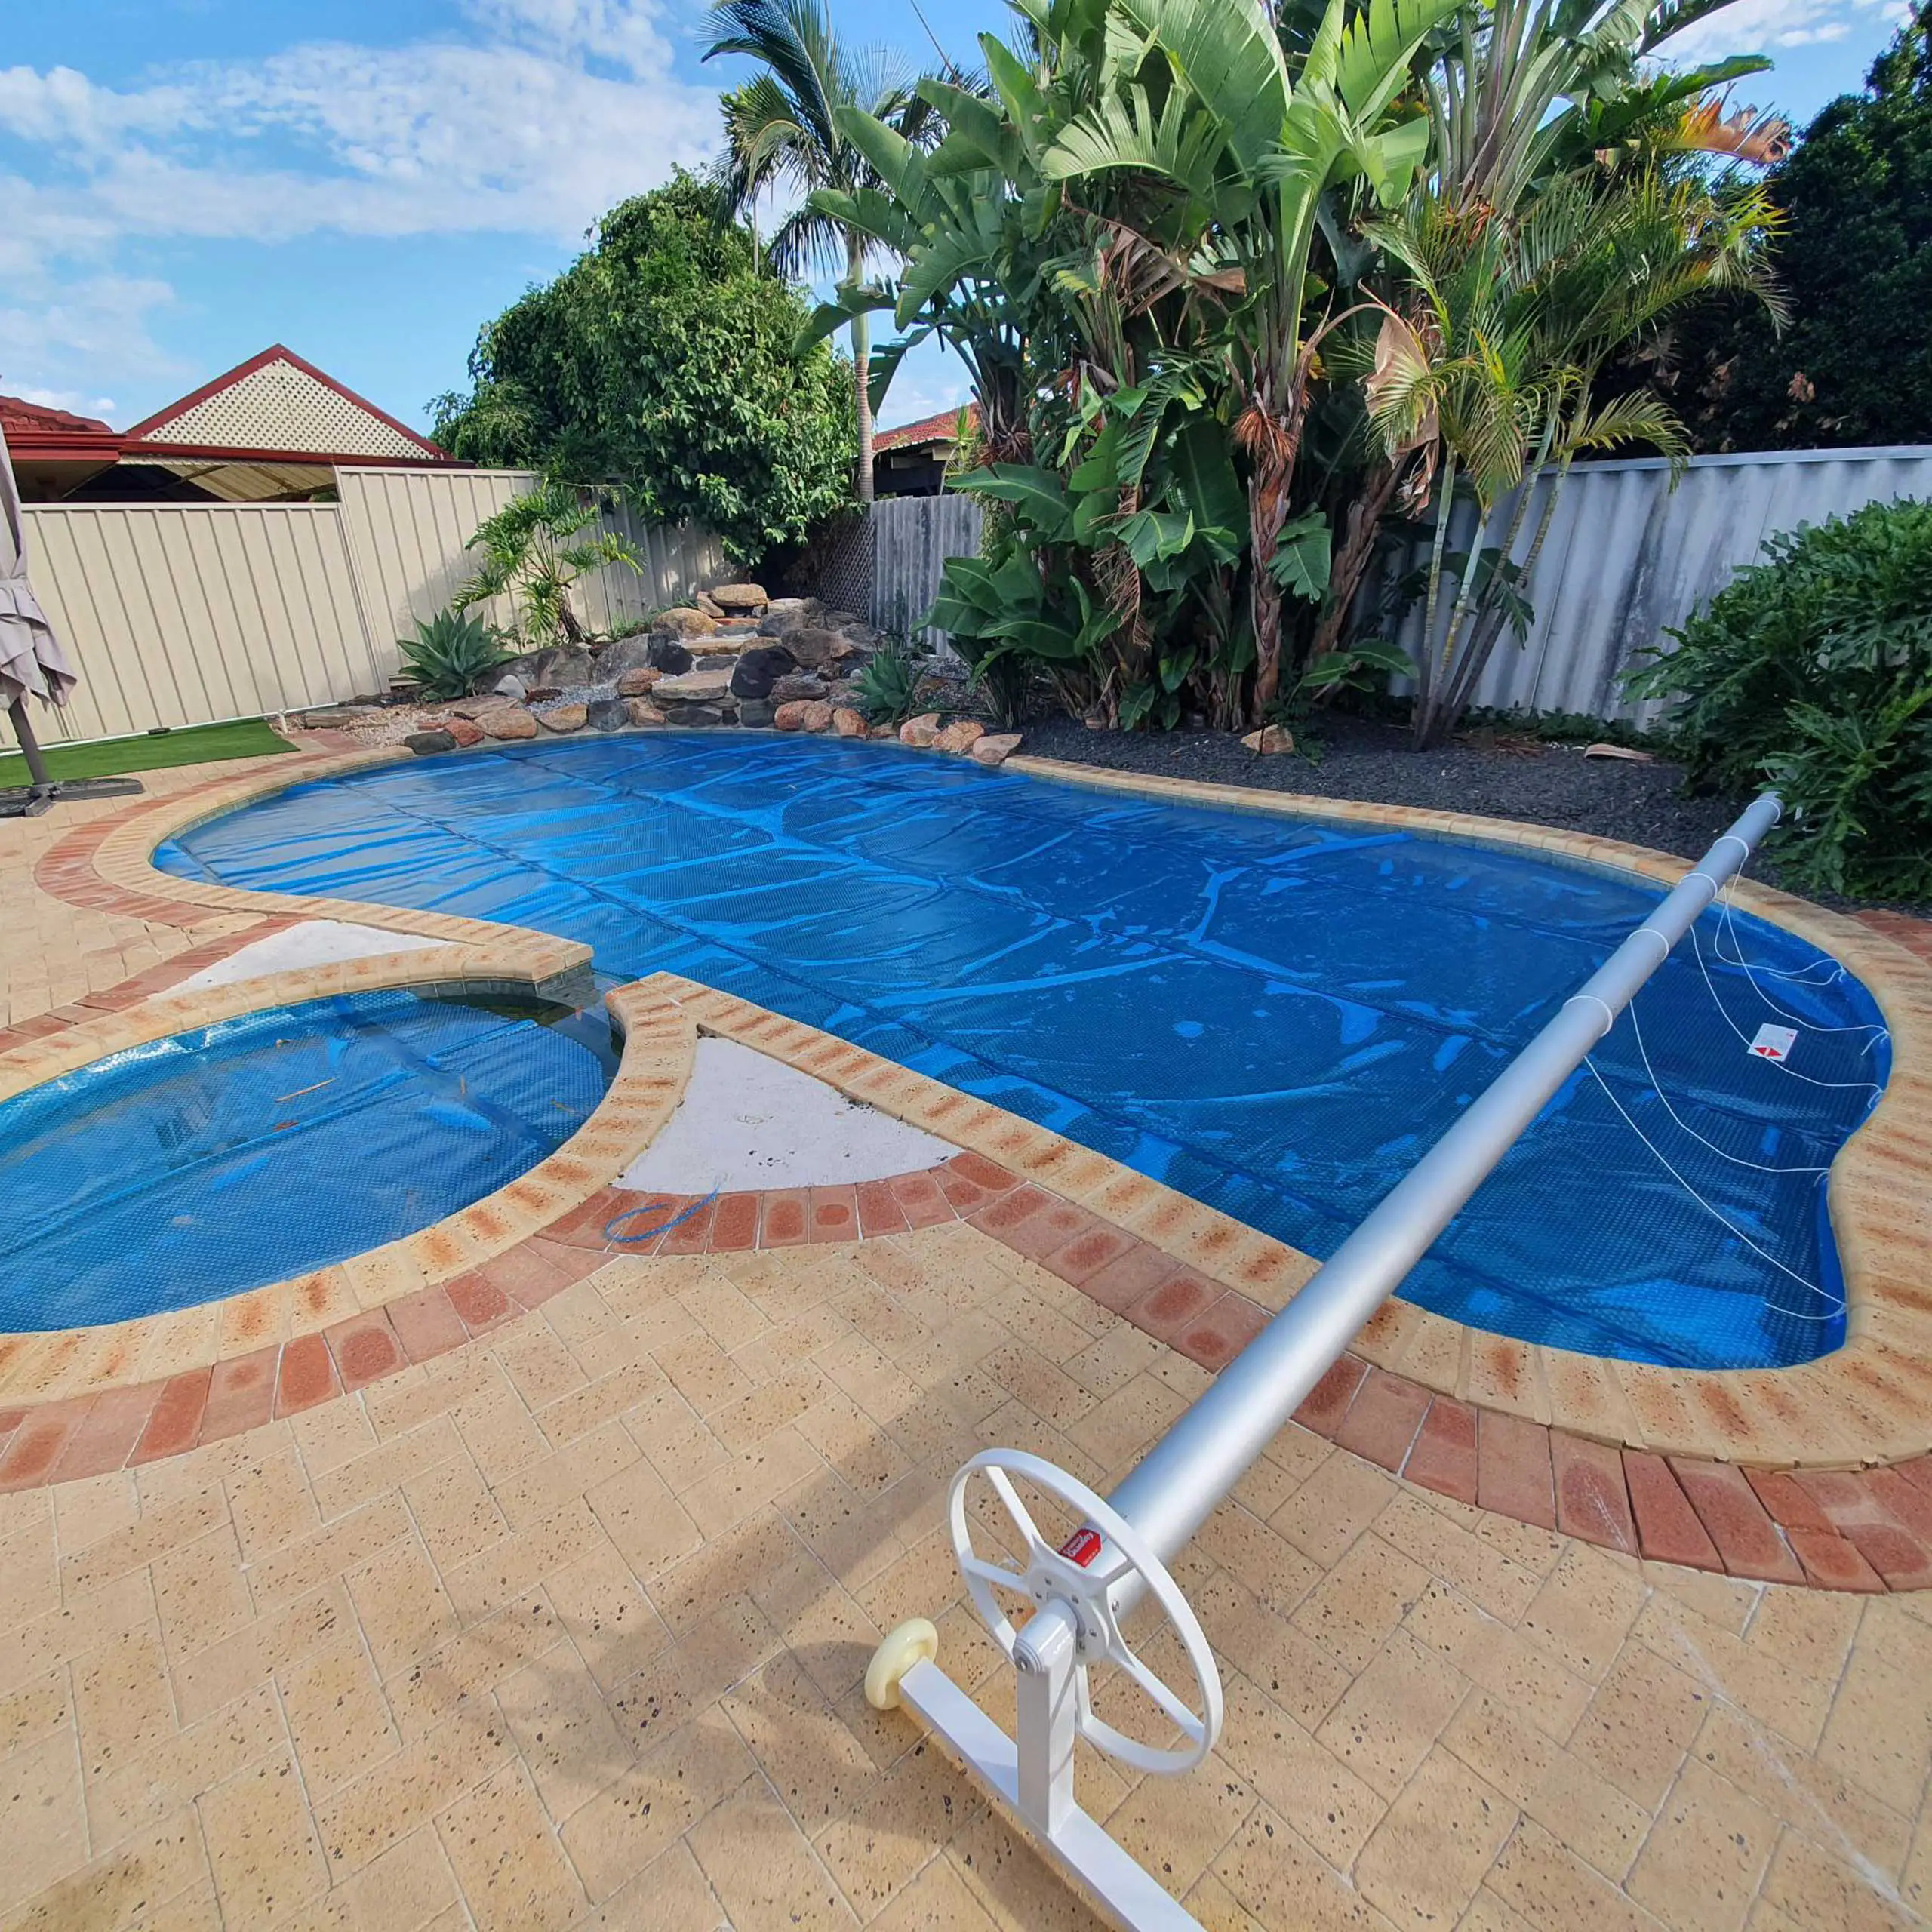 How Much Do Solar Pool Covers Cost